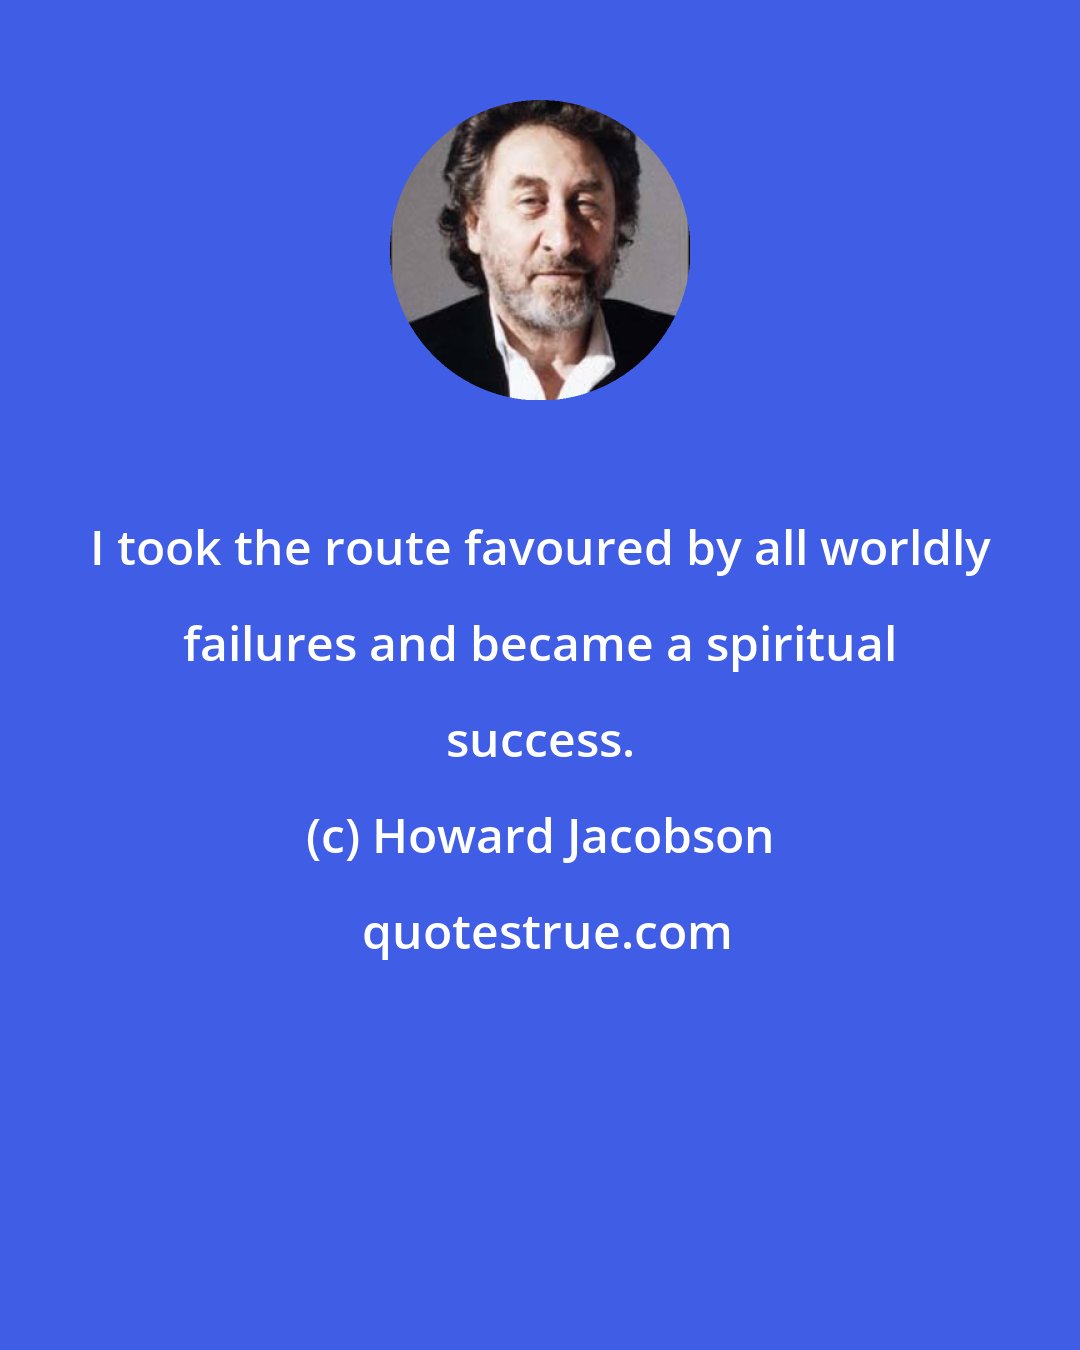 Howard Jacobson: I took the route favoured by all worldly failures and became a spiritual success.